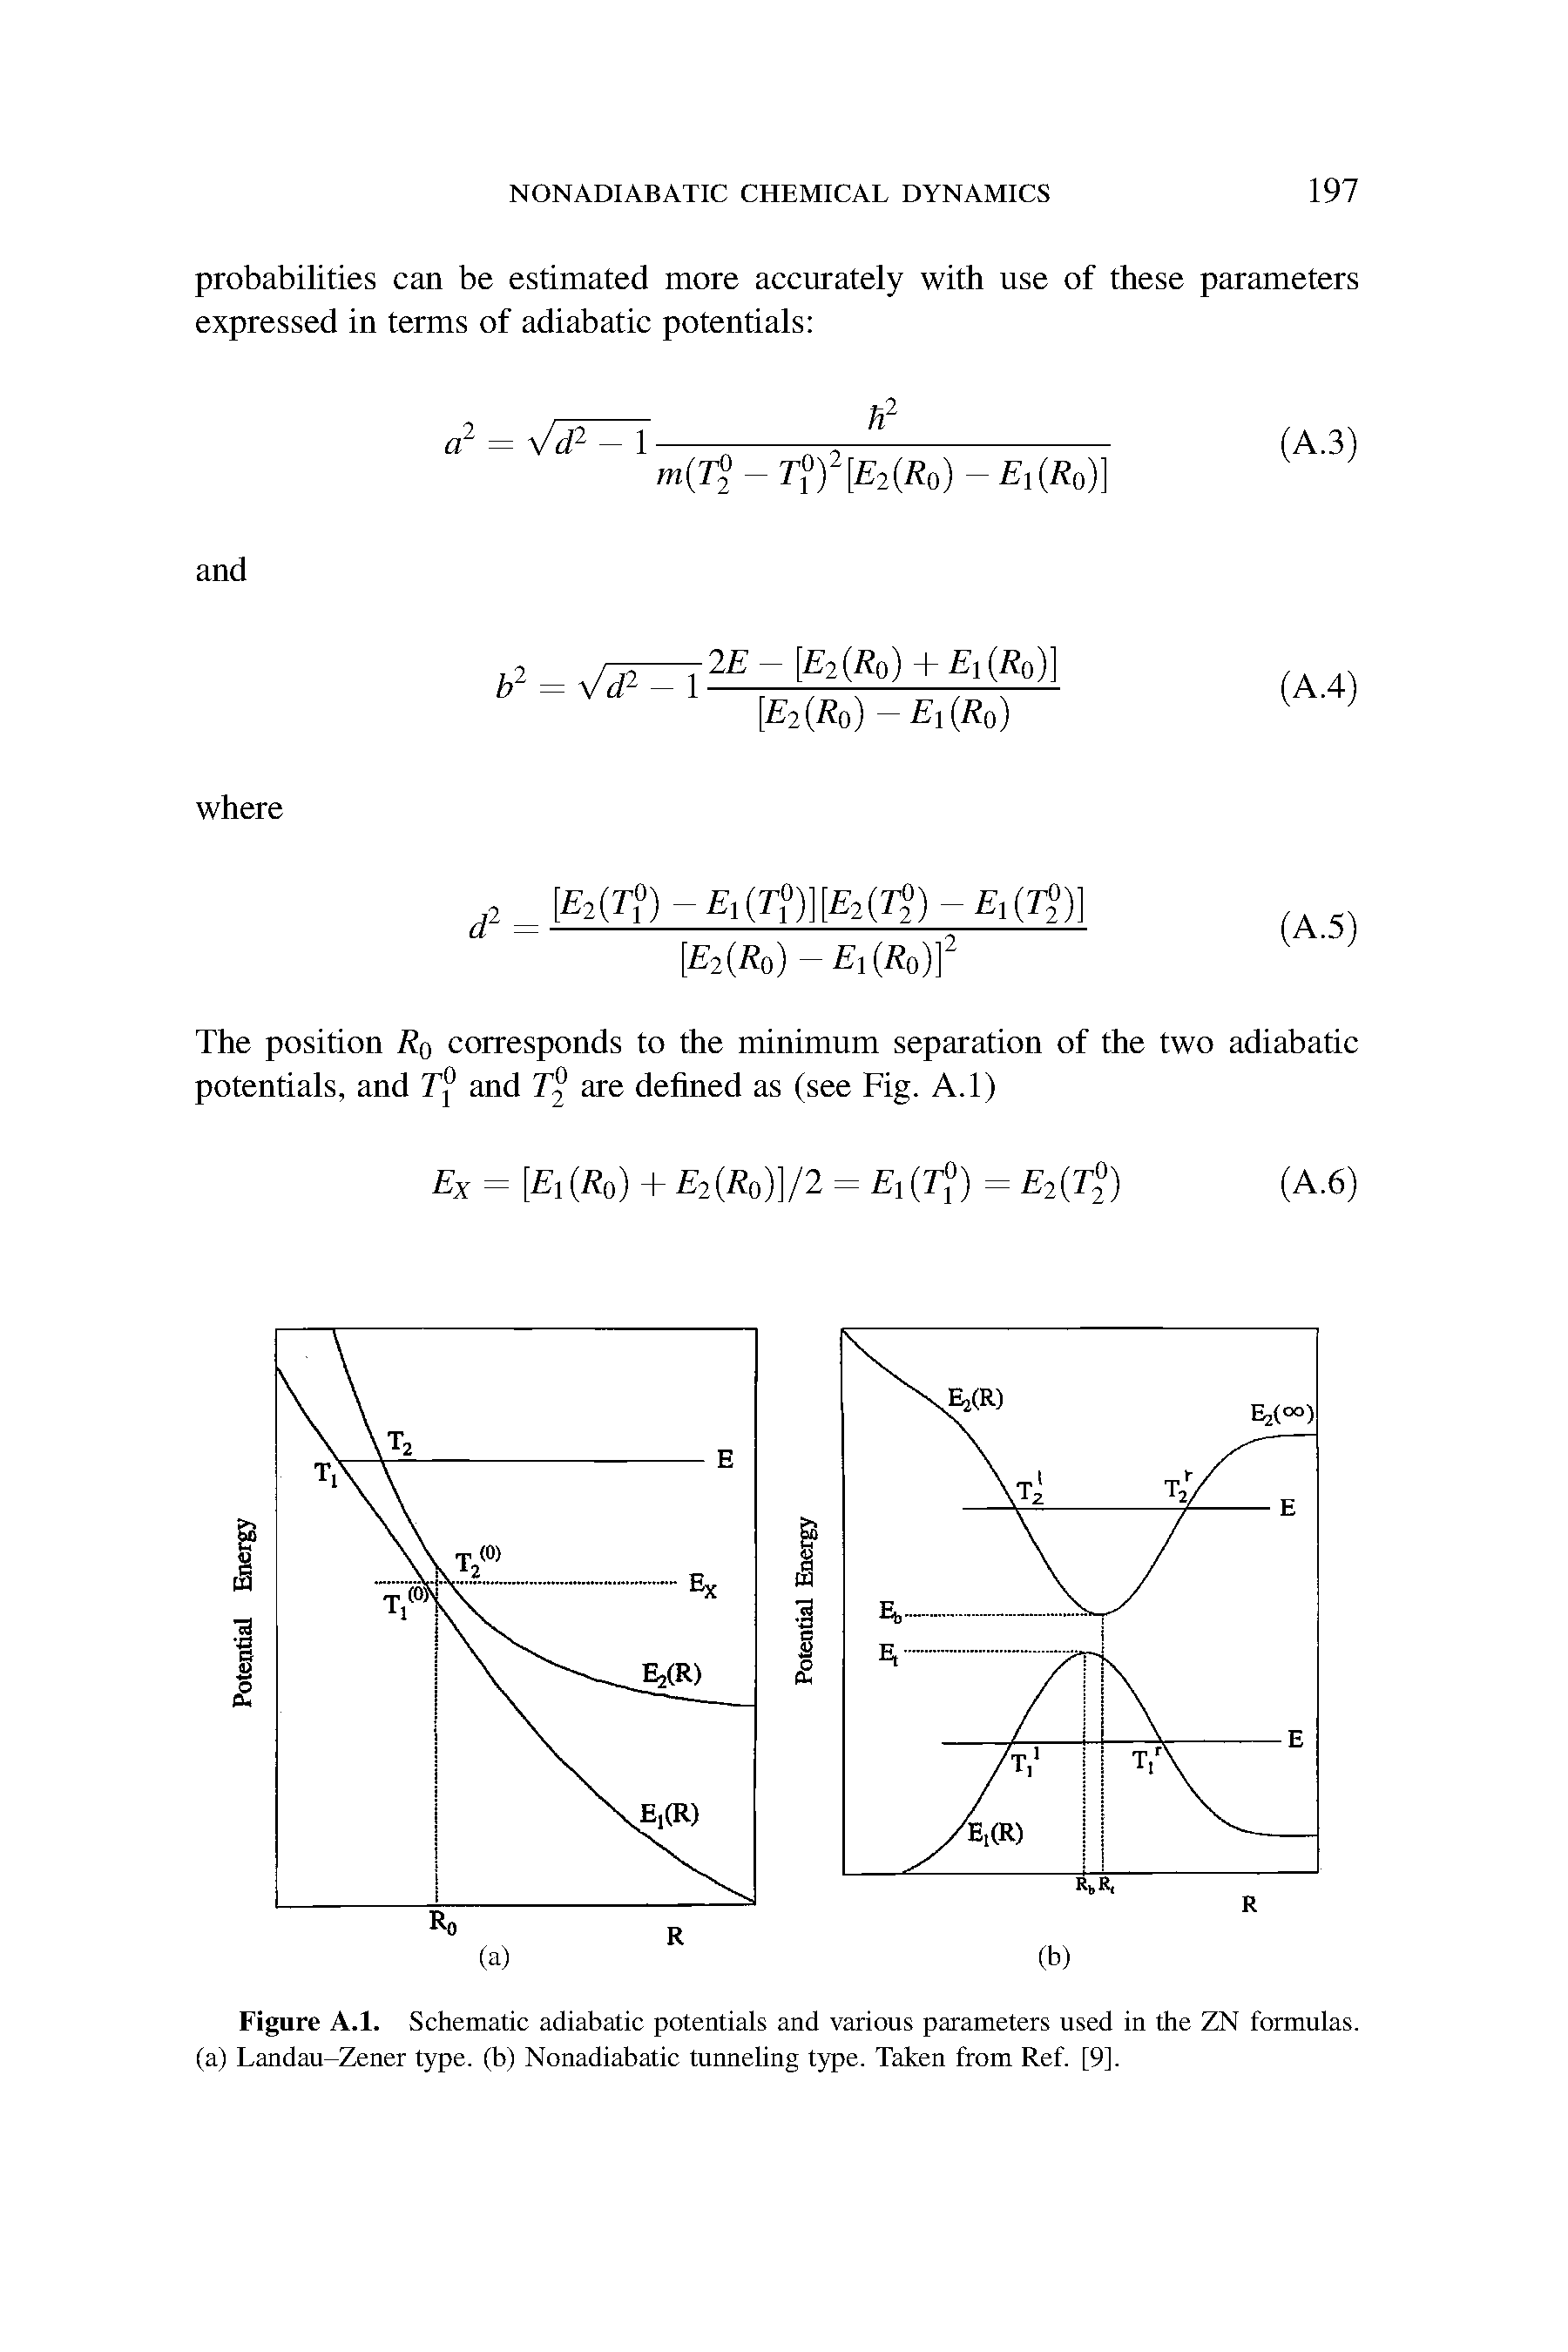 Figure A.l. Schematic adiabatic potentials and various parameters used in the ZN formulas, (a) Landau-Zener type, (b) Nonadiabatic tunneling type. Taken from Ref. [9].